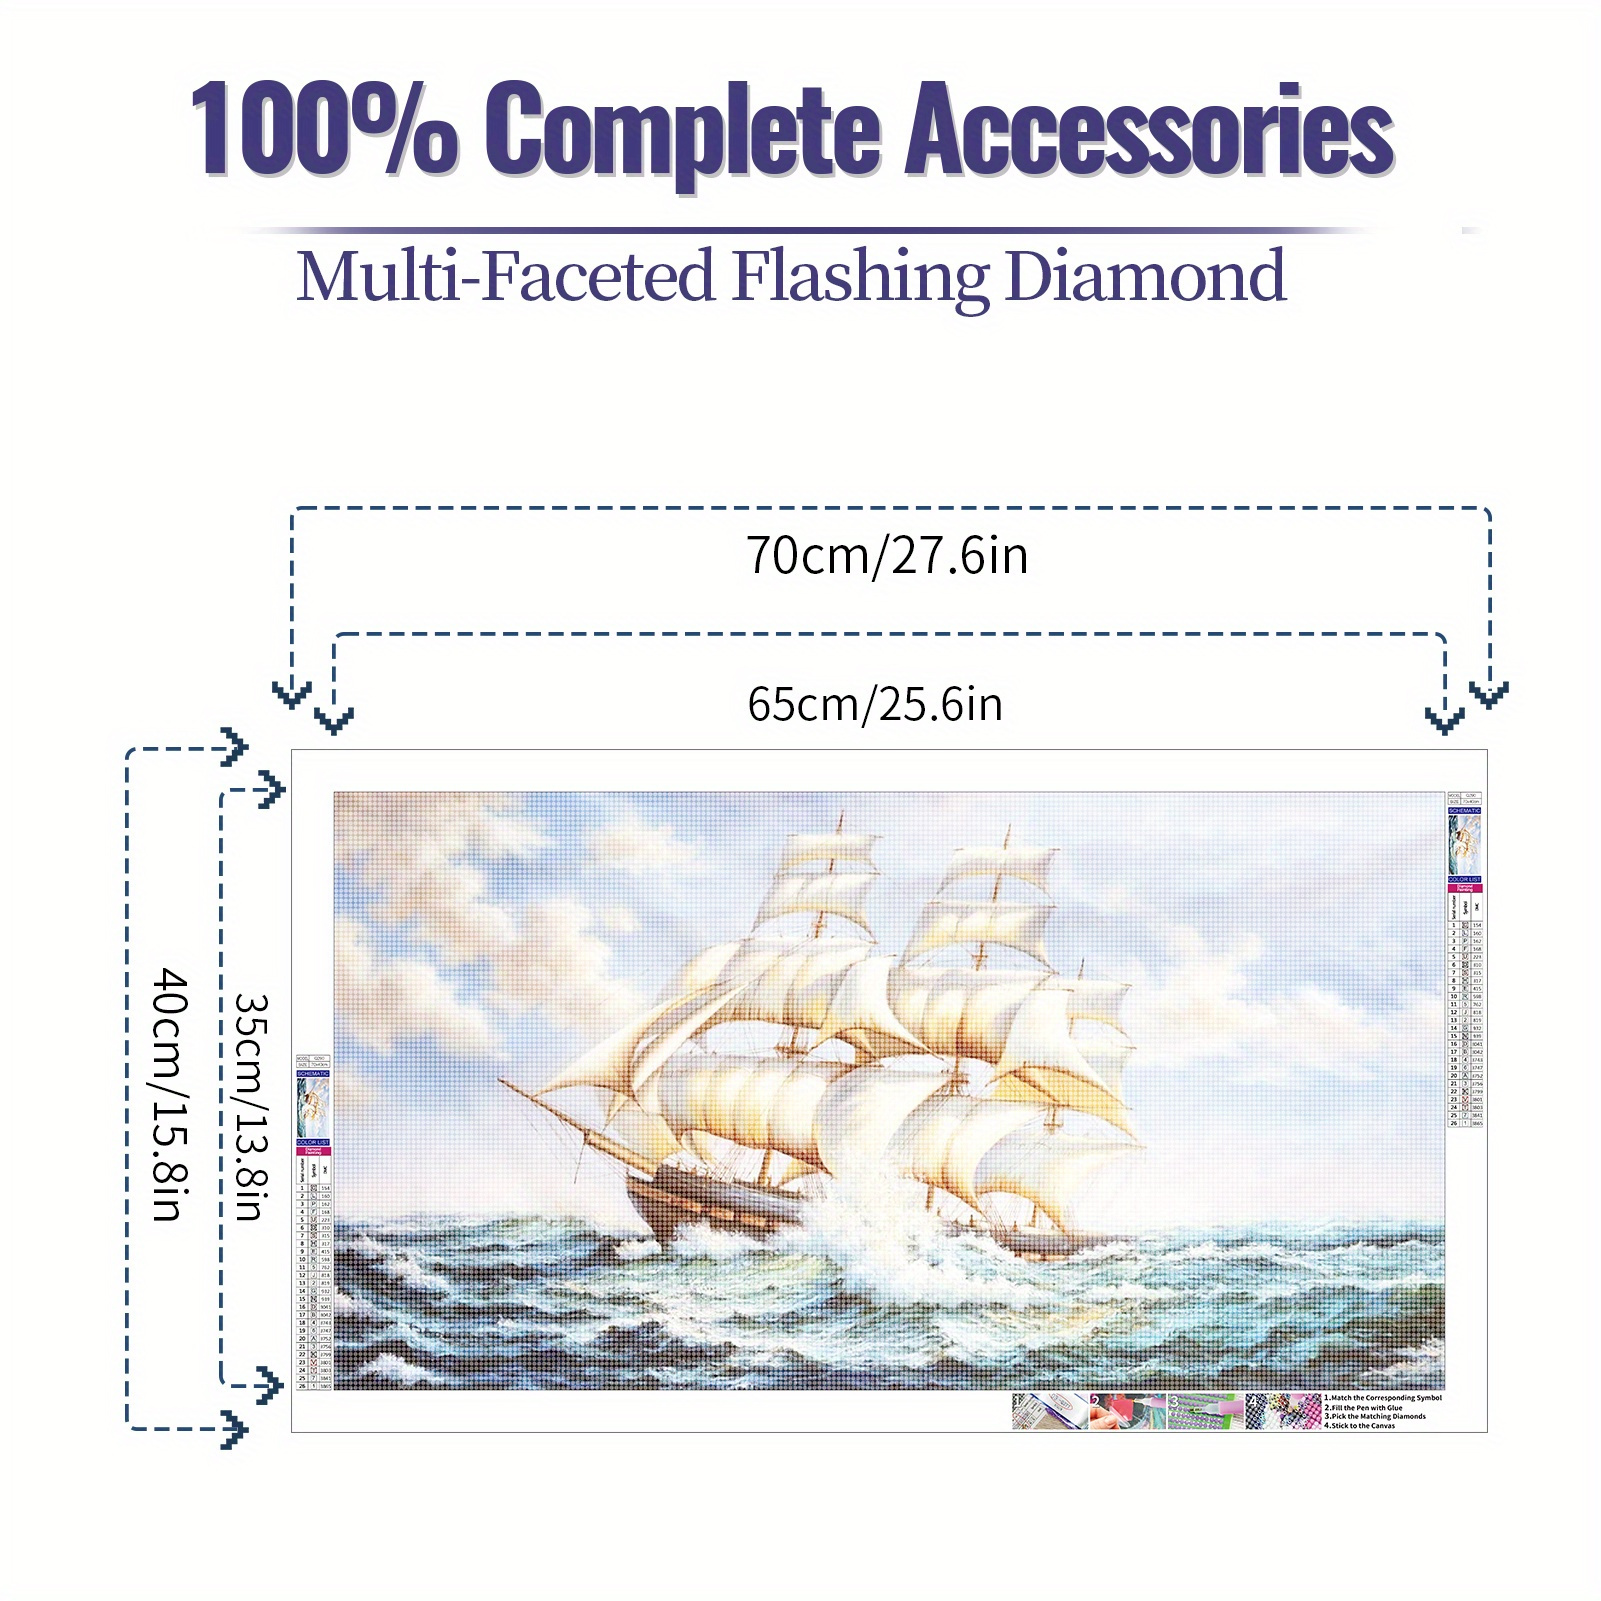 5D DIY Large Diamond Painting Kits For Adult,15.7x27.5inch/40x70cm Country  Cabin Round Full Diamond Diamond Art Kits Picture By Number Kits For Home W